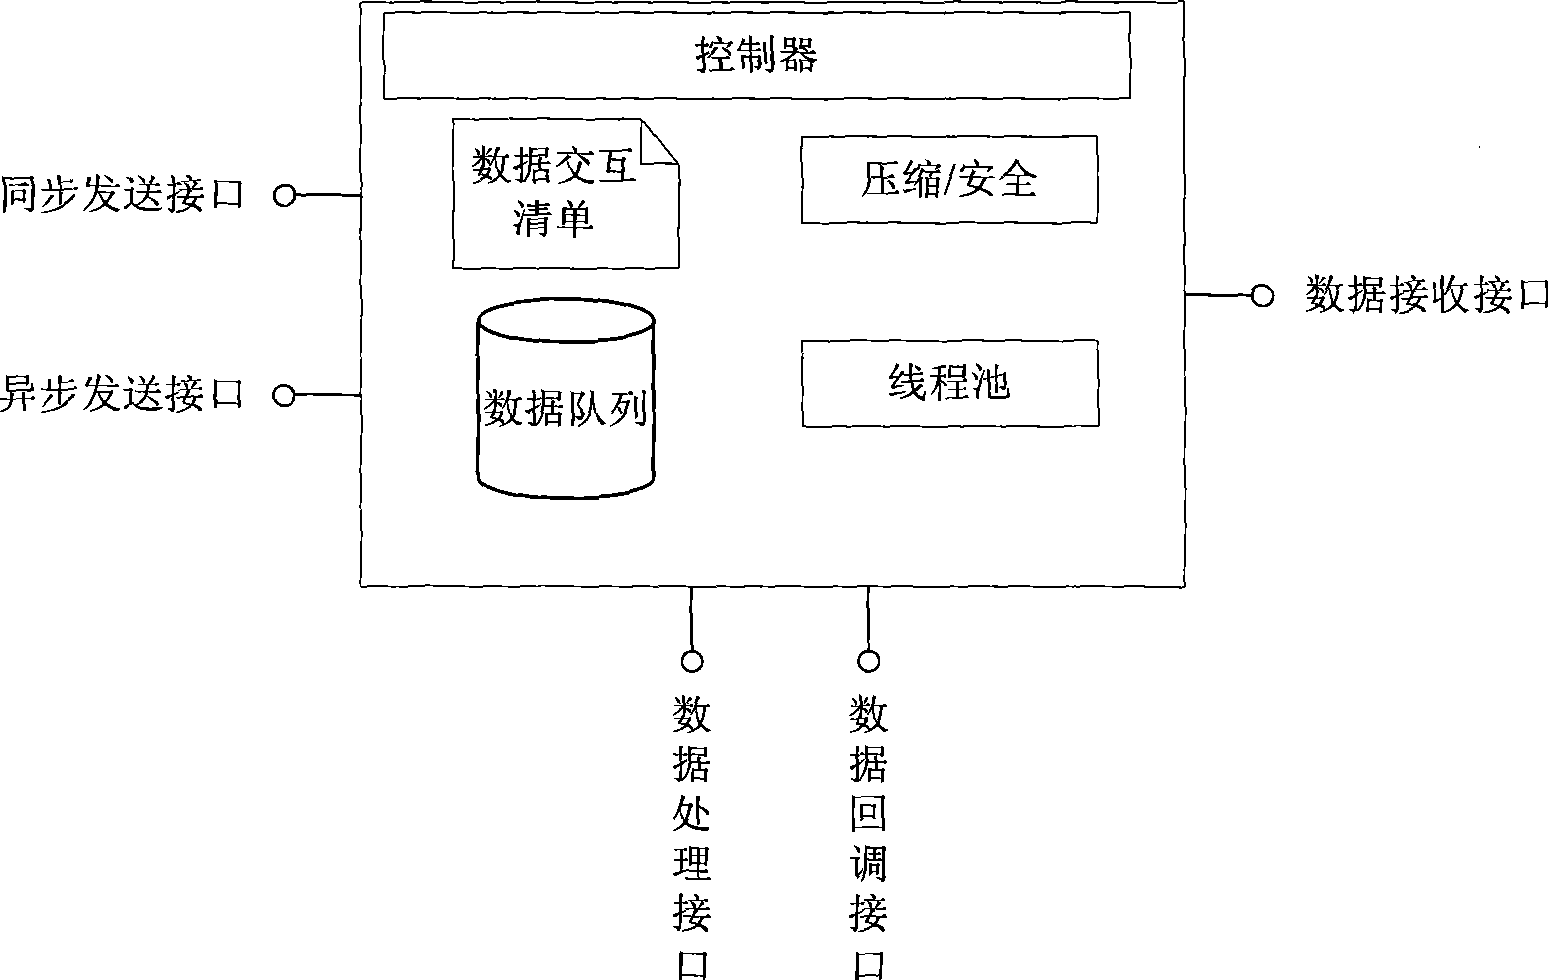 Processing unit implementing inter-system data interaction, data transmitting/receiving method